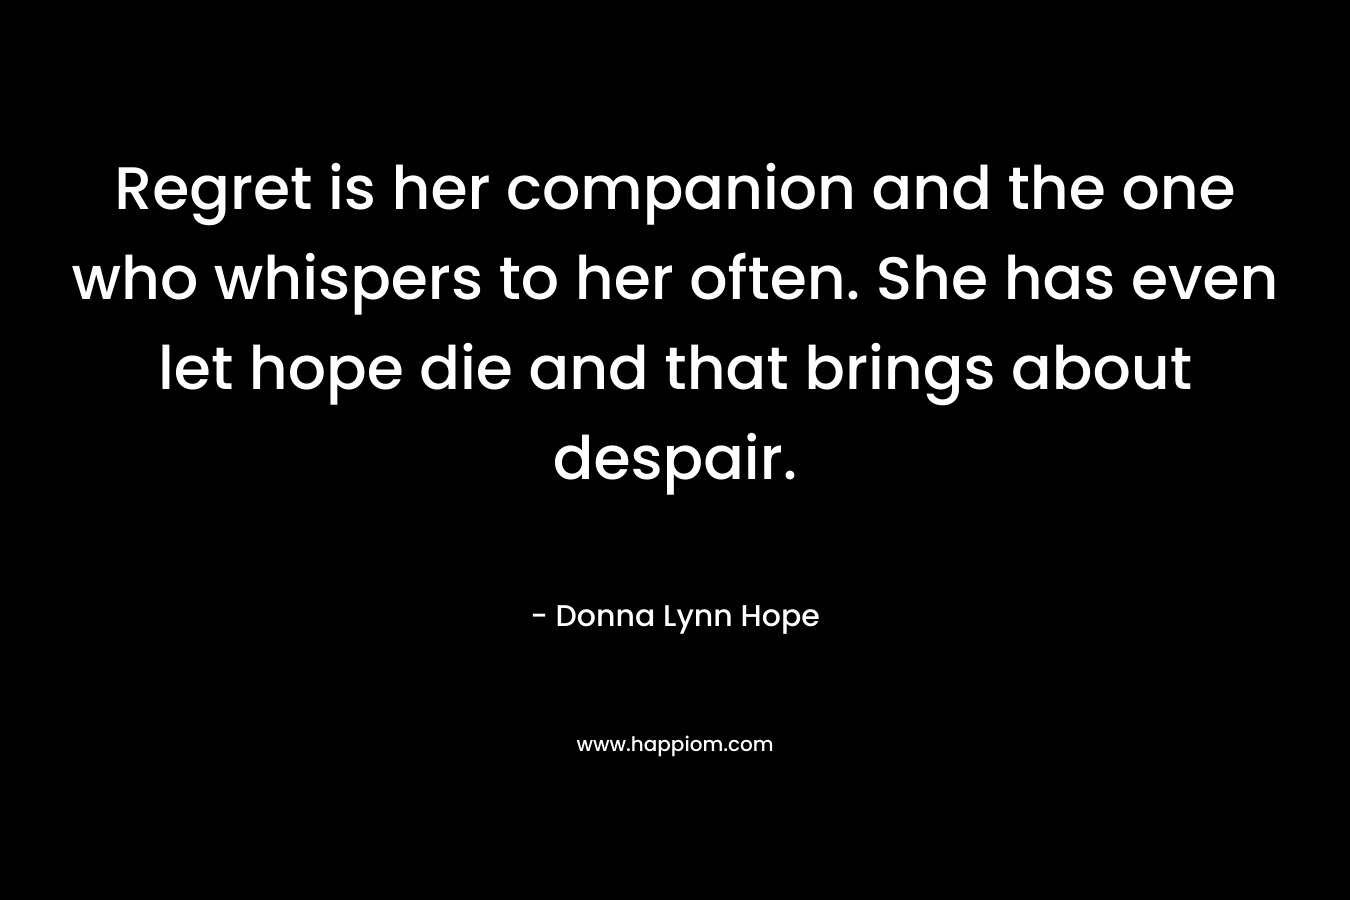 Regret is her companion and the one who whispers to her often. She has even let hope die and that brings about despair.